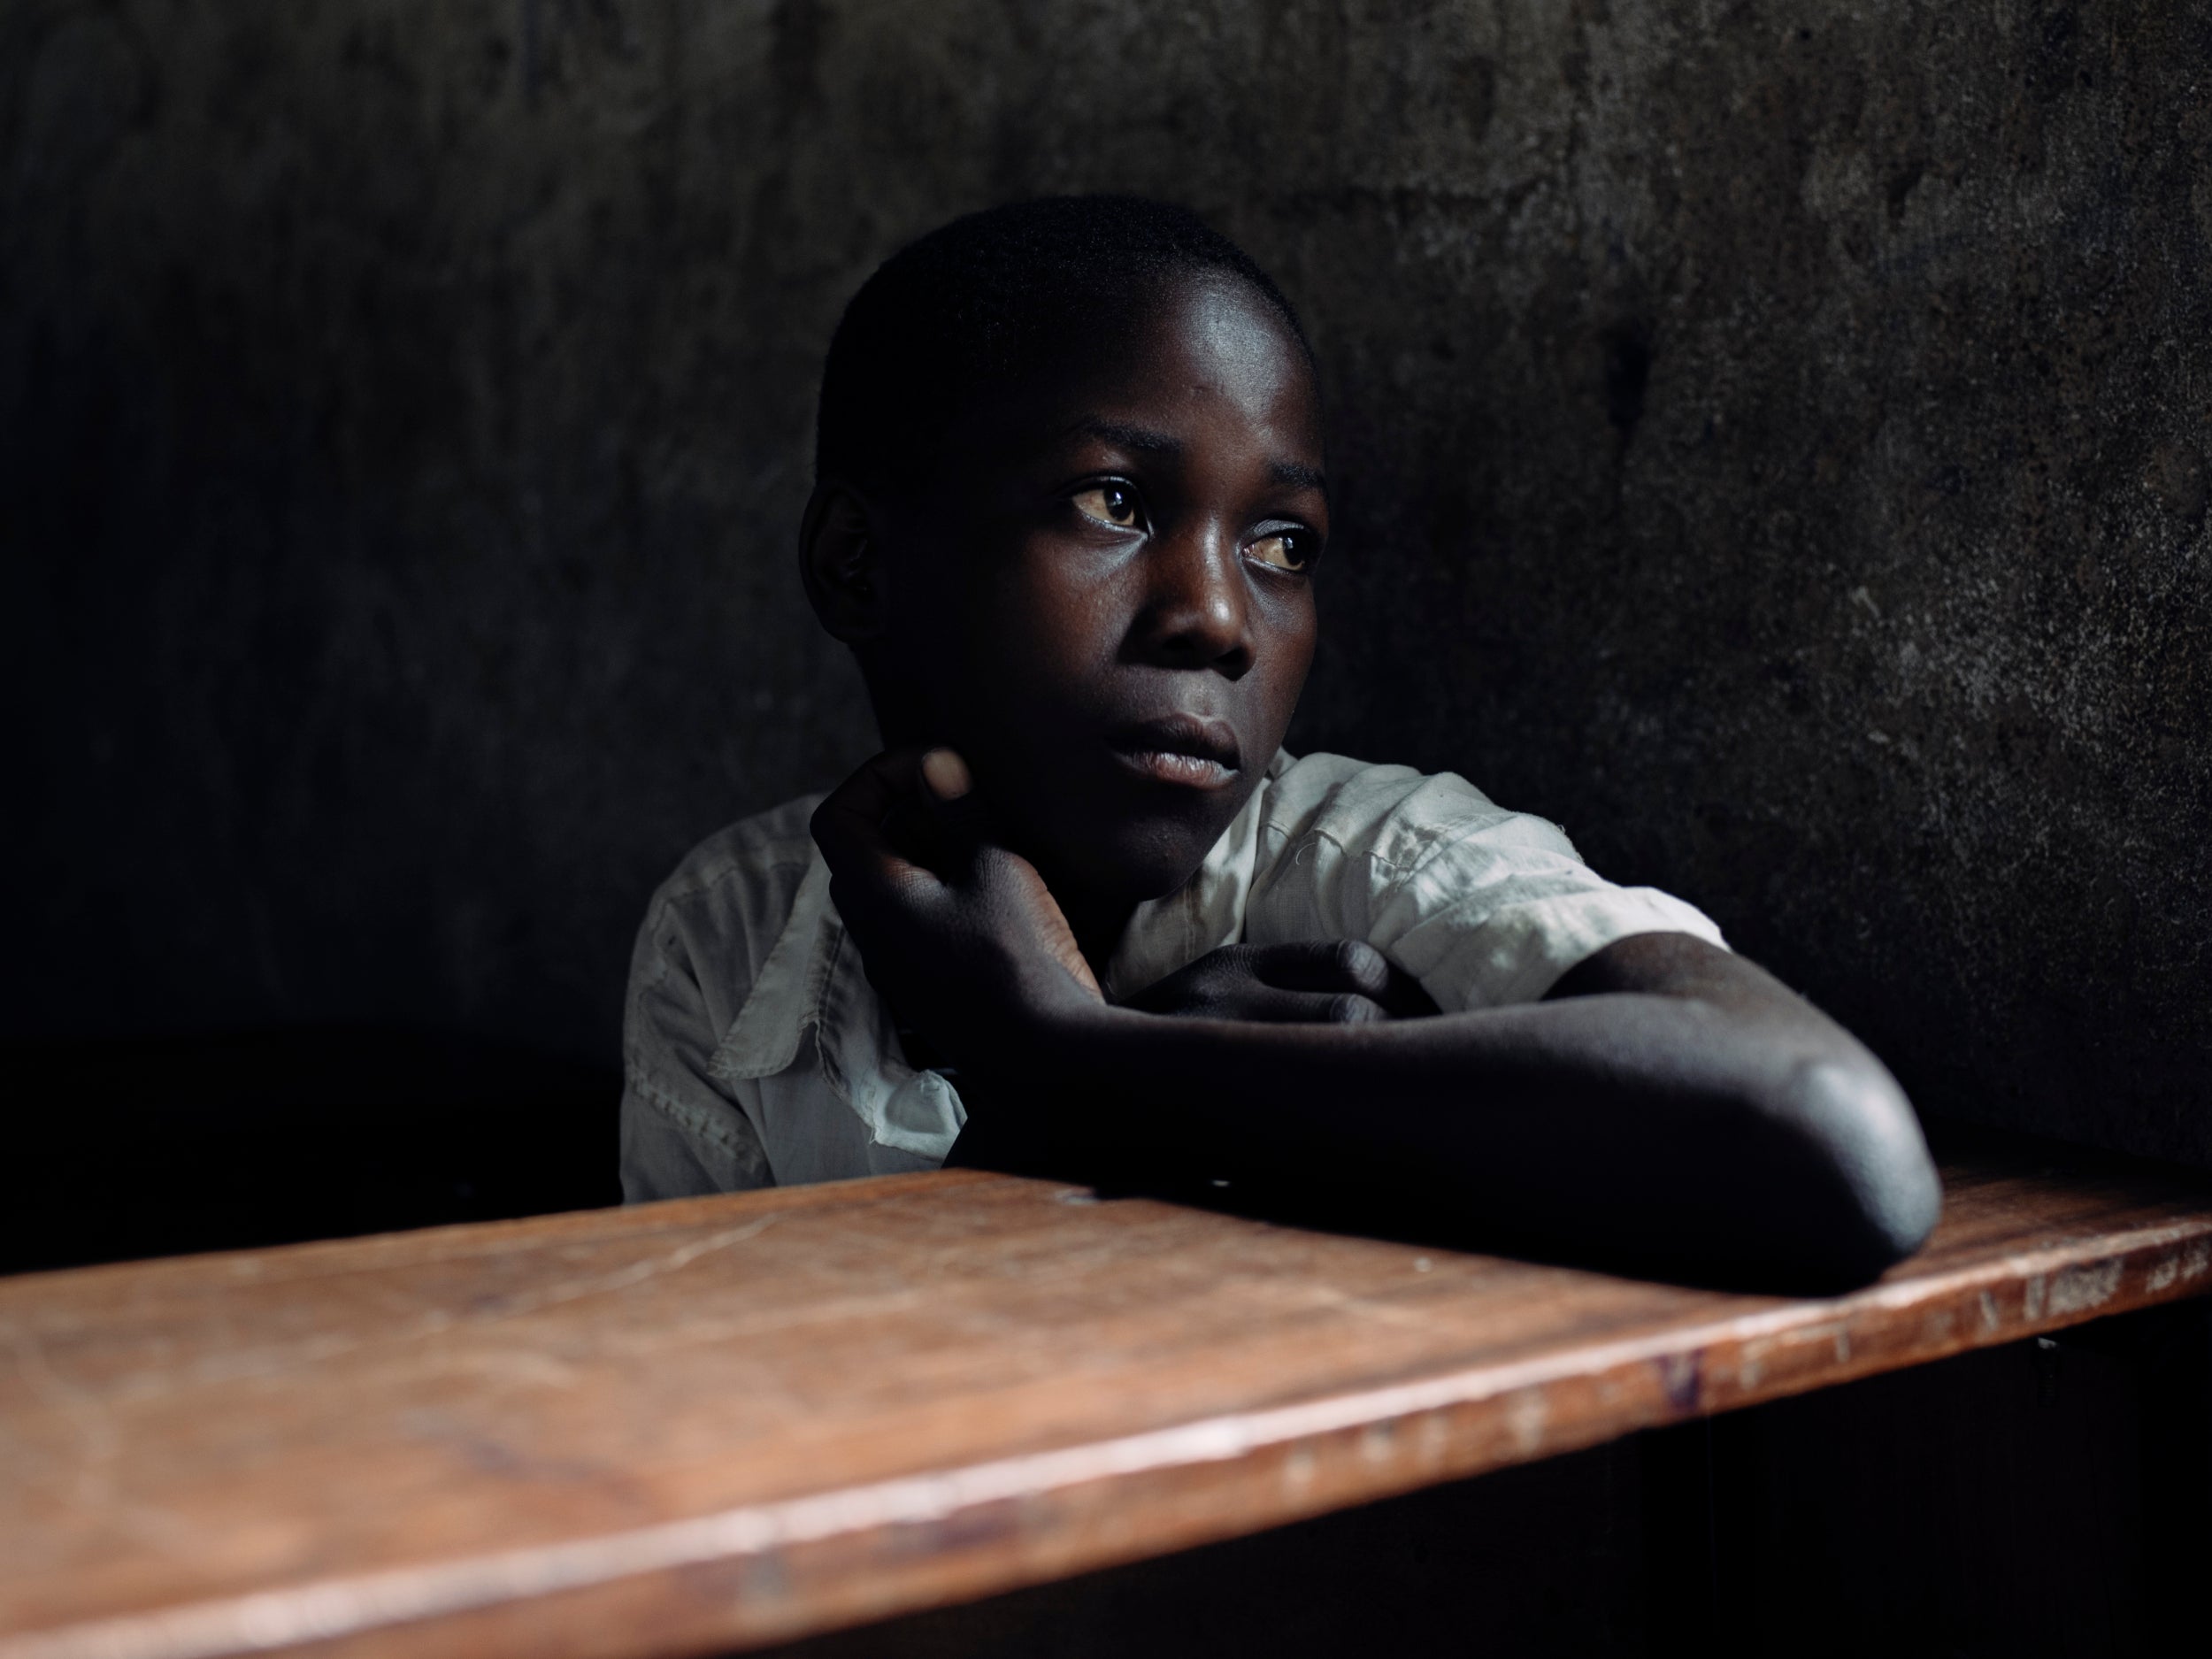 Jonas, 12, only started school aged 10 (three years past enrolment age in Tanzania) due to his family's financial restraints